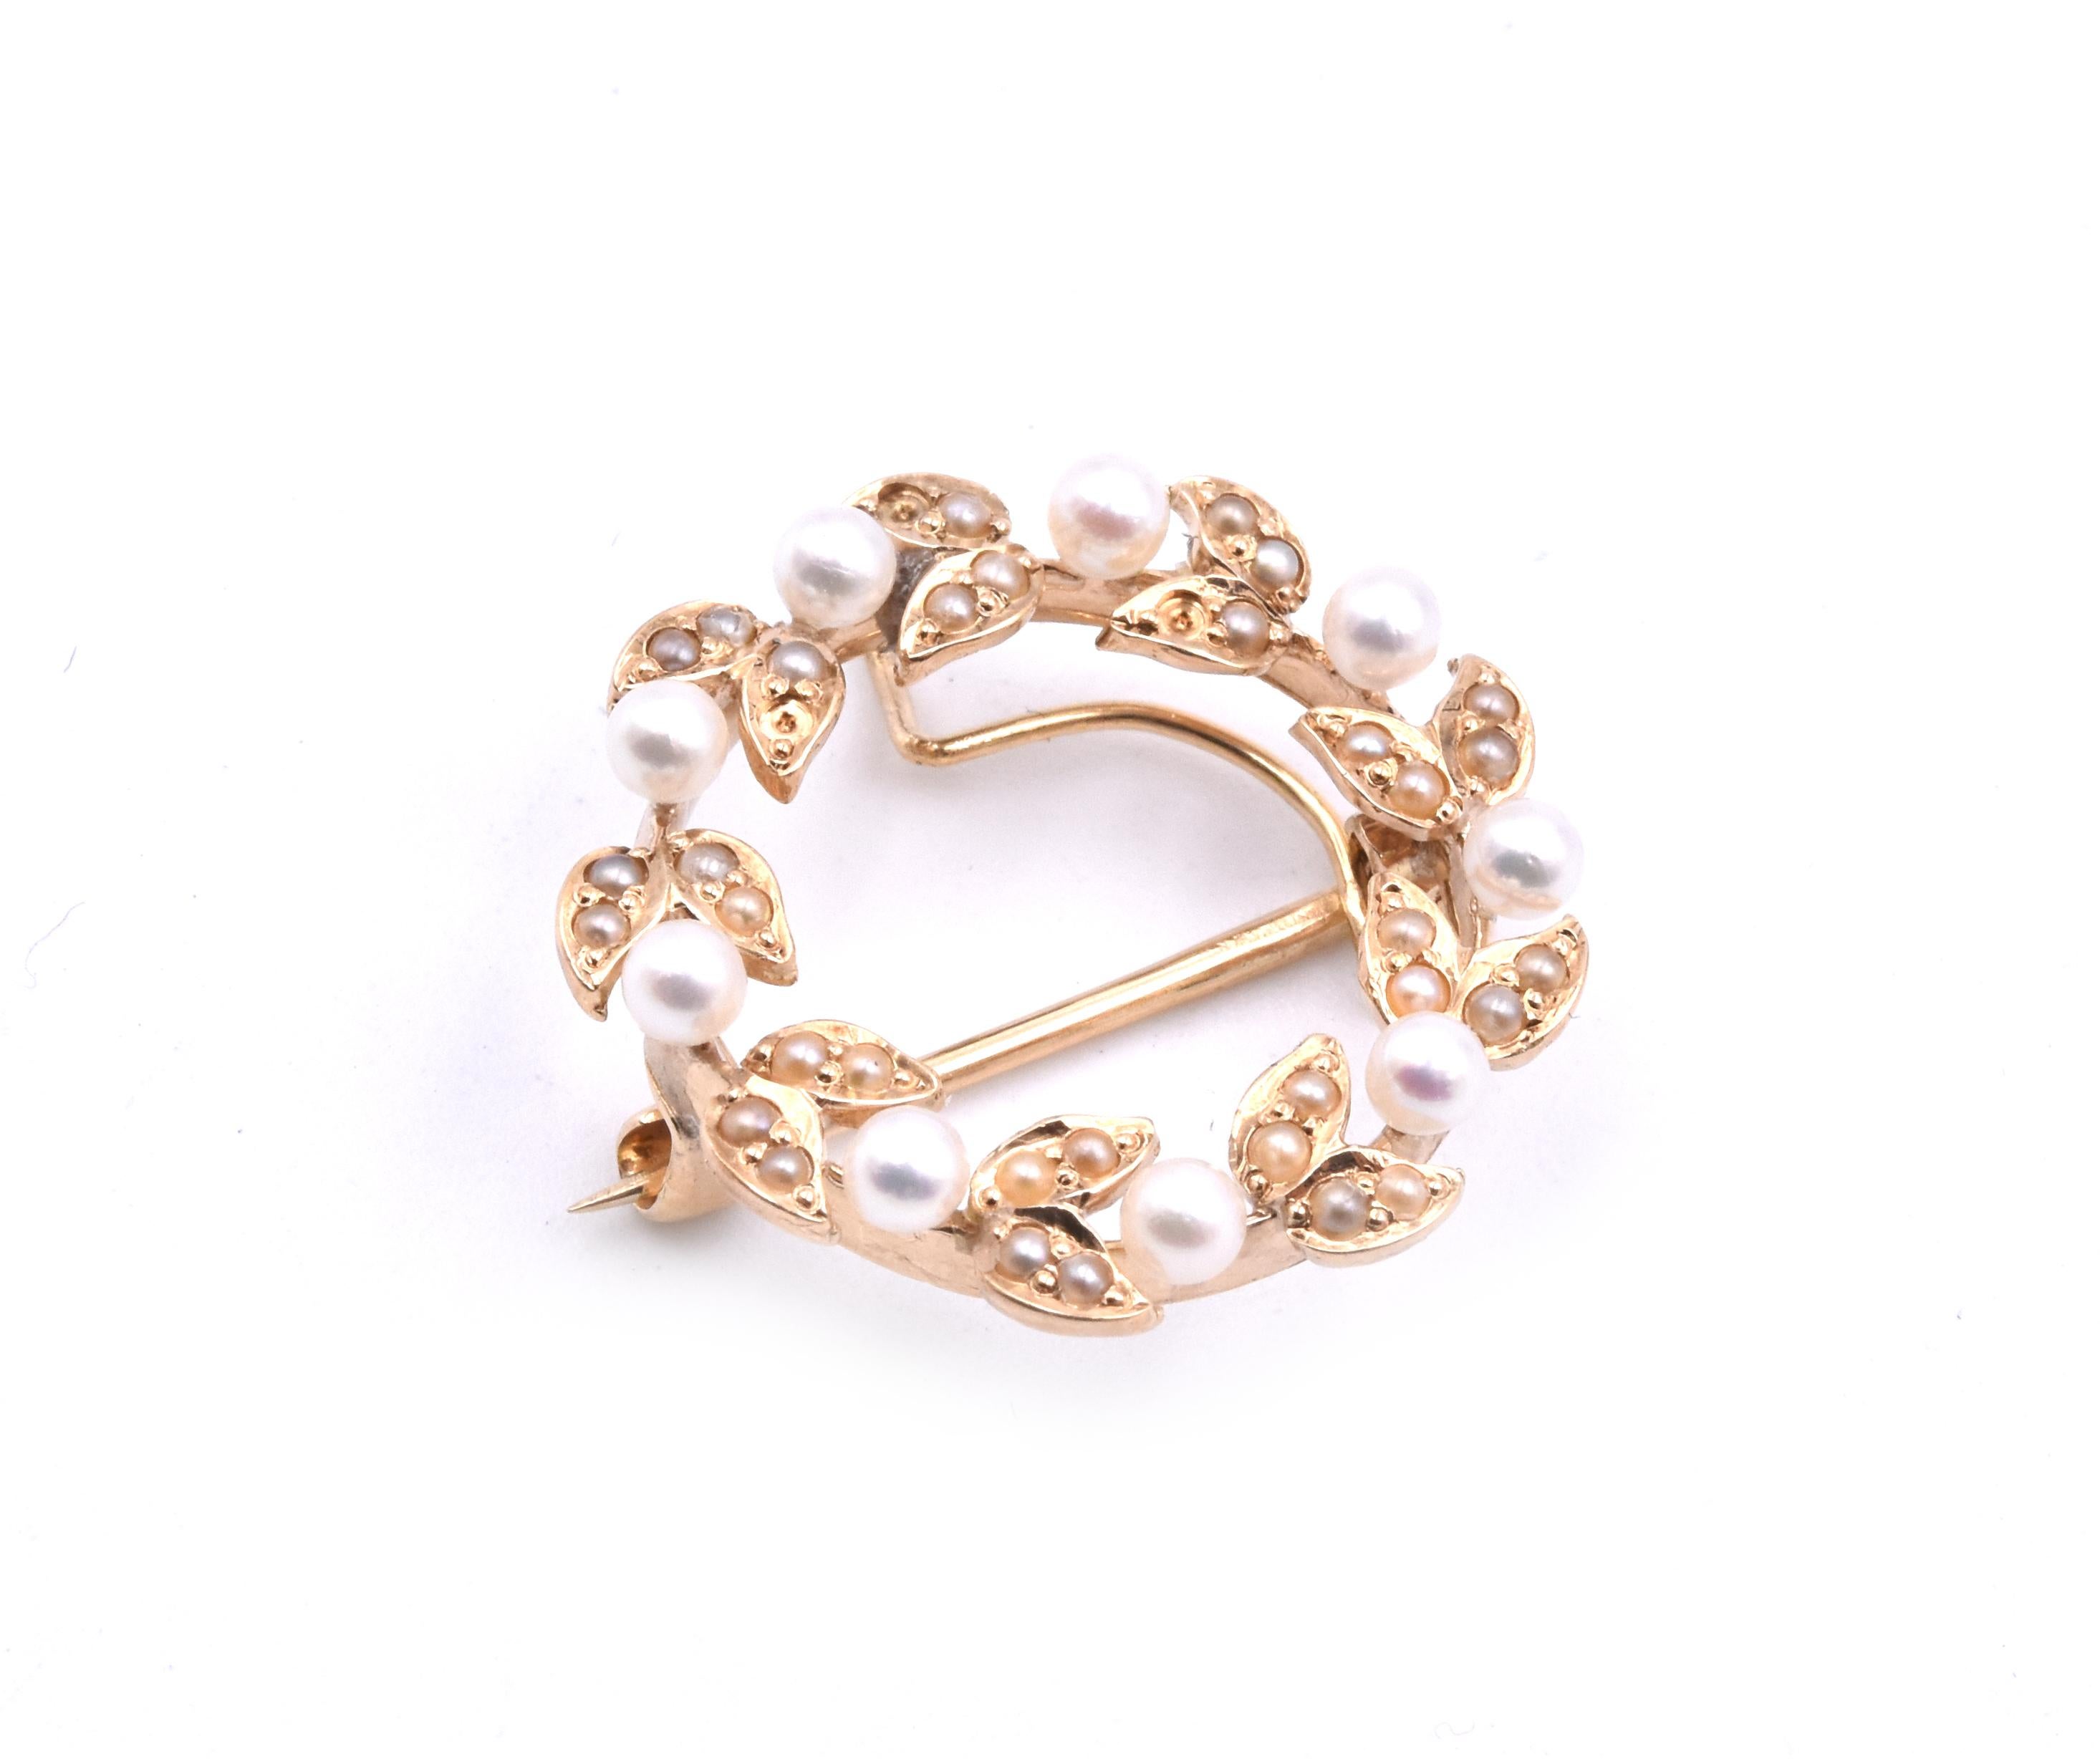 Designer: custom
Material: 14k yellow gold
Dimensions: pin is approximately 23.25mm
Weight: 3.71 grams
